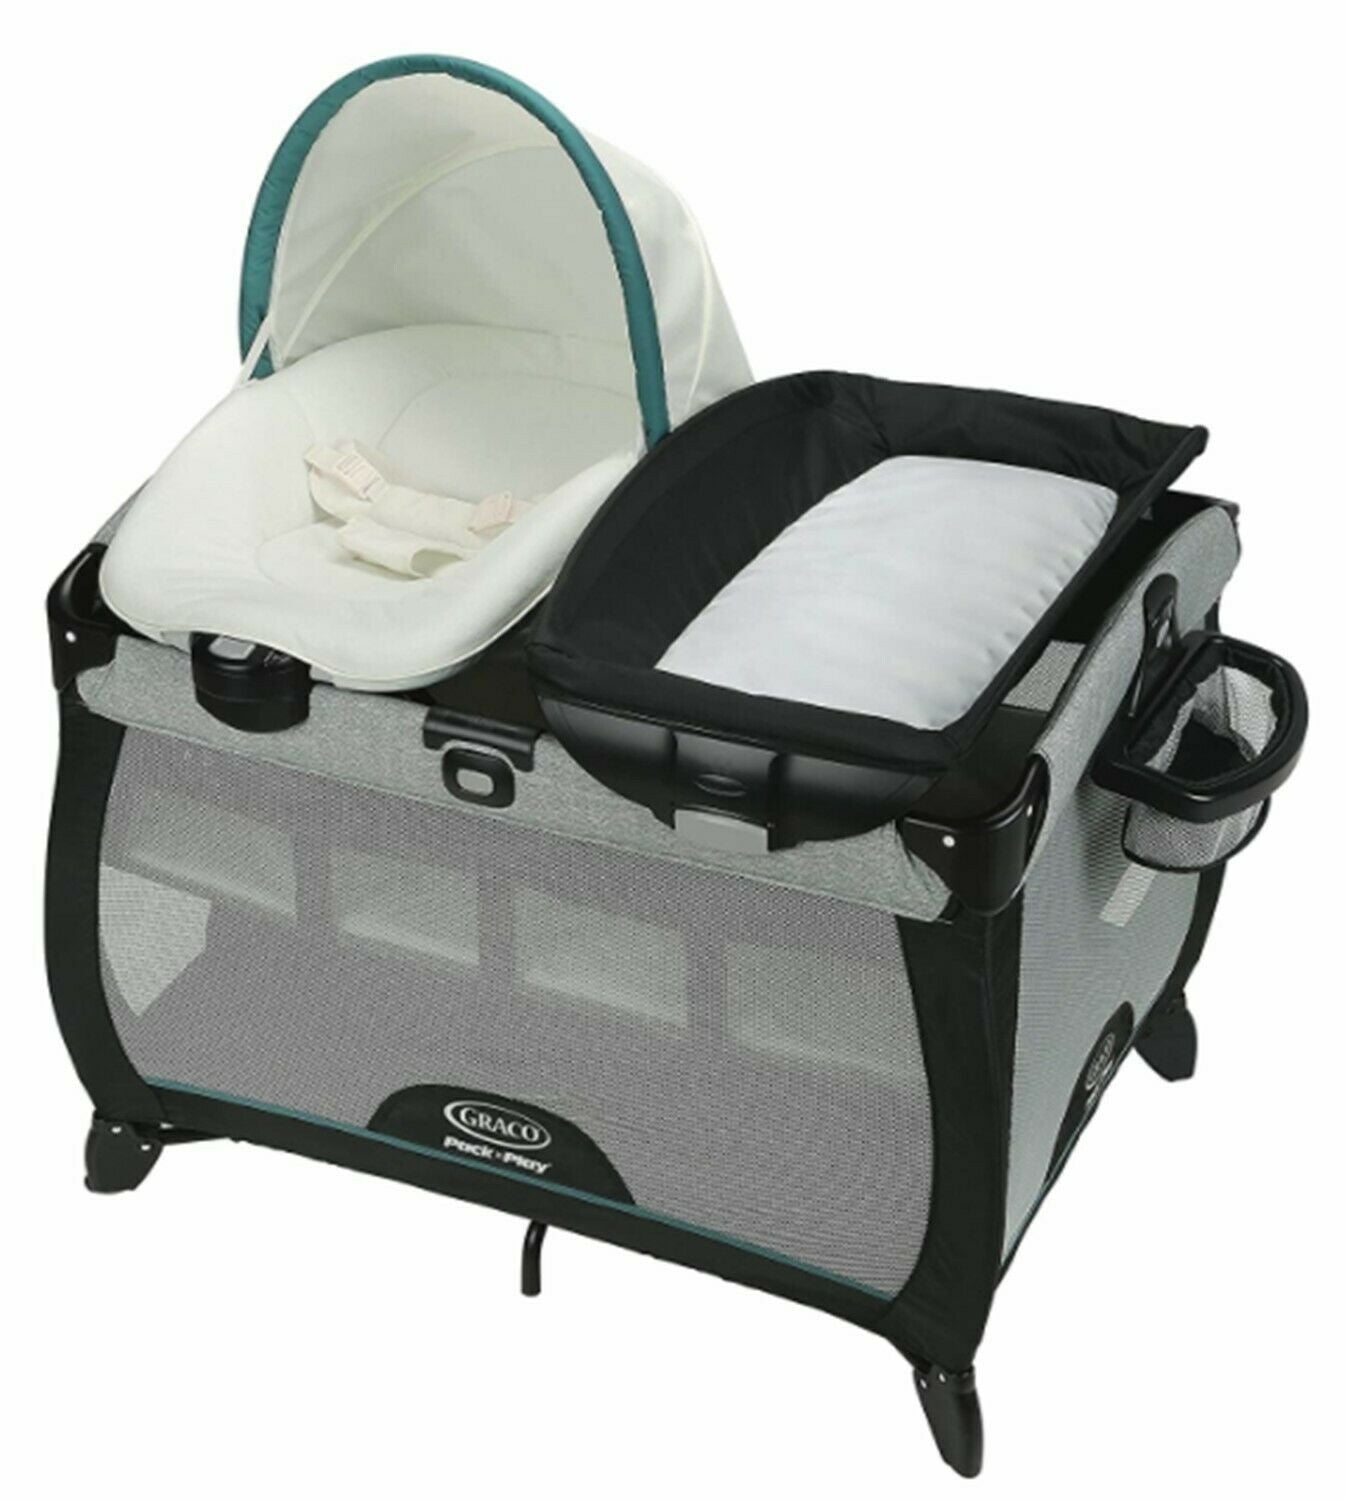 Graco Modes Baby Stroller Travel System with Infant Playard Nursery Combo